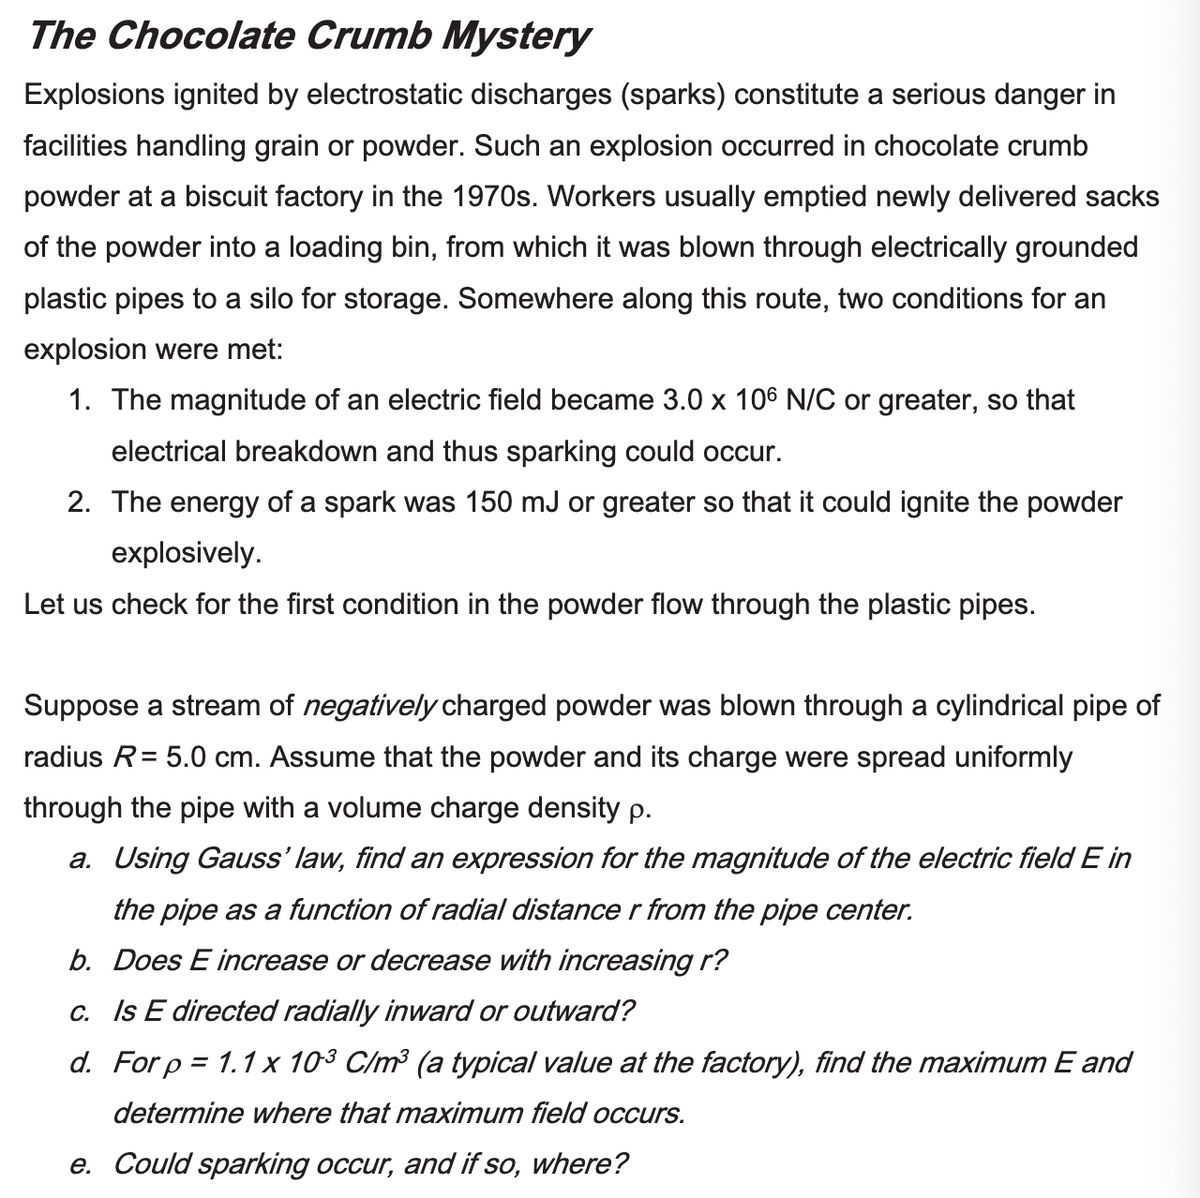 The Chocolate Crumb Mystery
Explosions ignited by electrostatic discharges (sparks) constitute a serious danger in
facilities handling grain or powder. Such an explosion occurred in chocolate crumb
powder at a biscuit factory in the 1970s. Workers usually emptied newly delivered sacks
of the powder into a loading bin, from which it was blown through electrically grounded
plastic pipes to a silo for storage. Somewhere along this route, two conditions for an
explosion were met:
1. The magnitude of an electric field became 3.0 x 106 N/C or greater, so that
electrical breakdown and thus sparking could occur.
2. The energy of a spark was 150 mJ or greater so that it could ignite the powder
explosively.
Let us check for the first condition in the powder flow through the plastic pipes.
Suppose a stream of negatively charged powder was blown through a cylindrical pipe of
radius R = 5.0 cm. Assume that the powder and its charge were spread uniformly
through the pipe with a volume charge density p.
a. Using Gauss' law, find an expression for the magnitude of the electric field E in
the pipe as a function of radial distance r from the pipe center.
b. Does E increase or decrease with increasing r?
c. Is E directed radially inward or outward?
d. For p = 1.1 x 103 C/m³ (a typical value at the factory), find the maximum E and
determine where that maximum field occurs.
e. Could sparking occur, and if so, where?